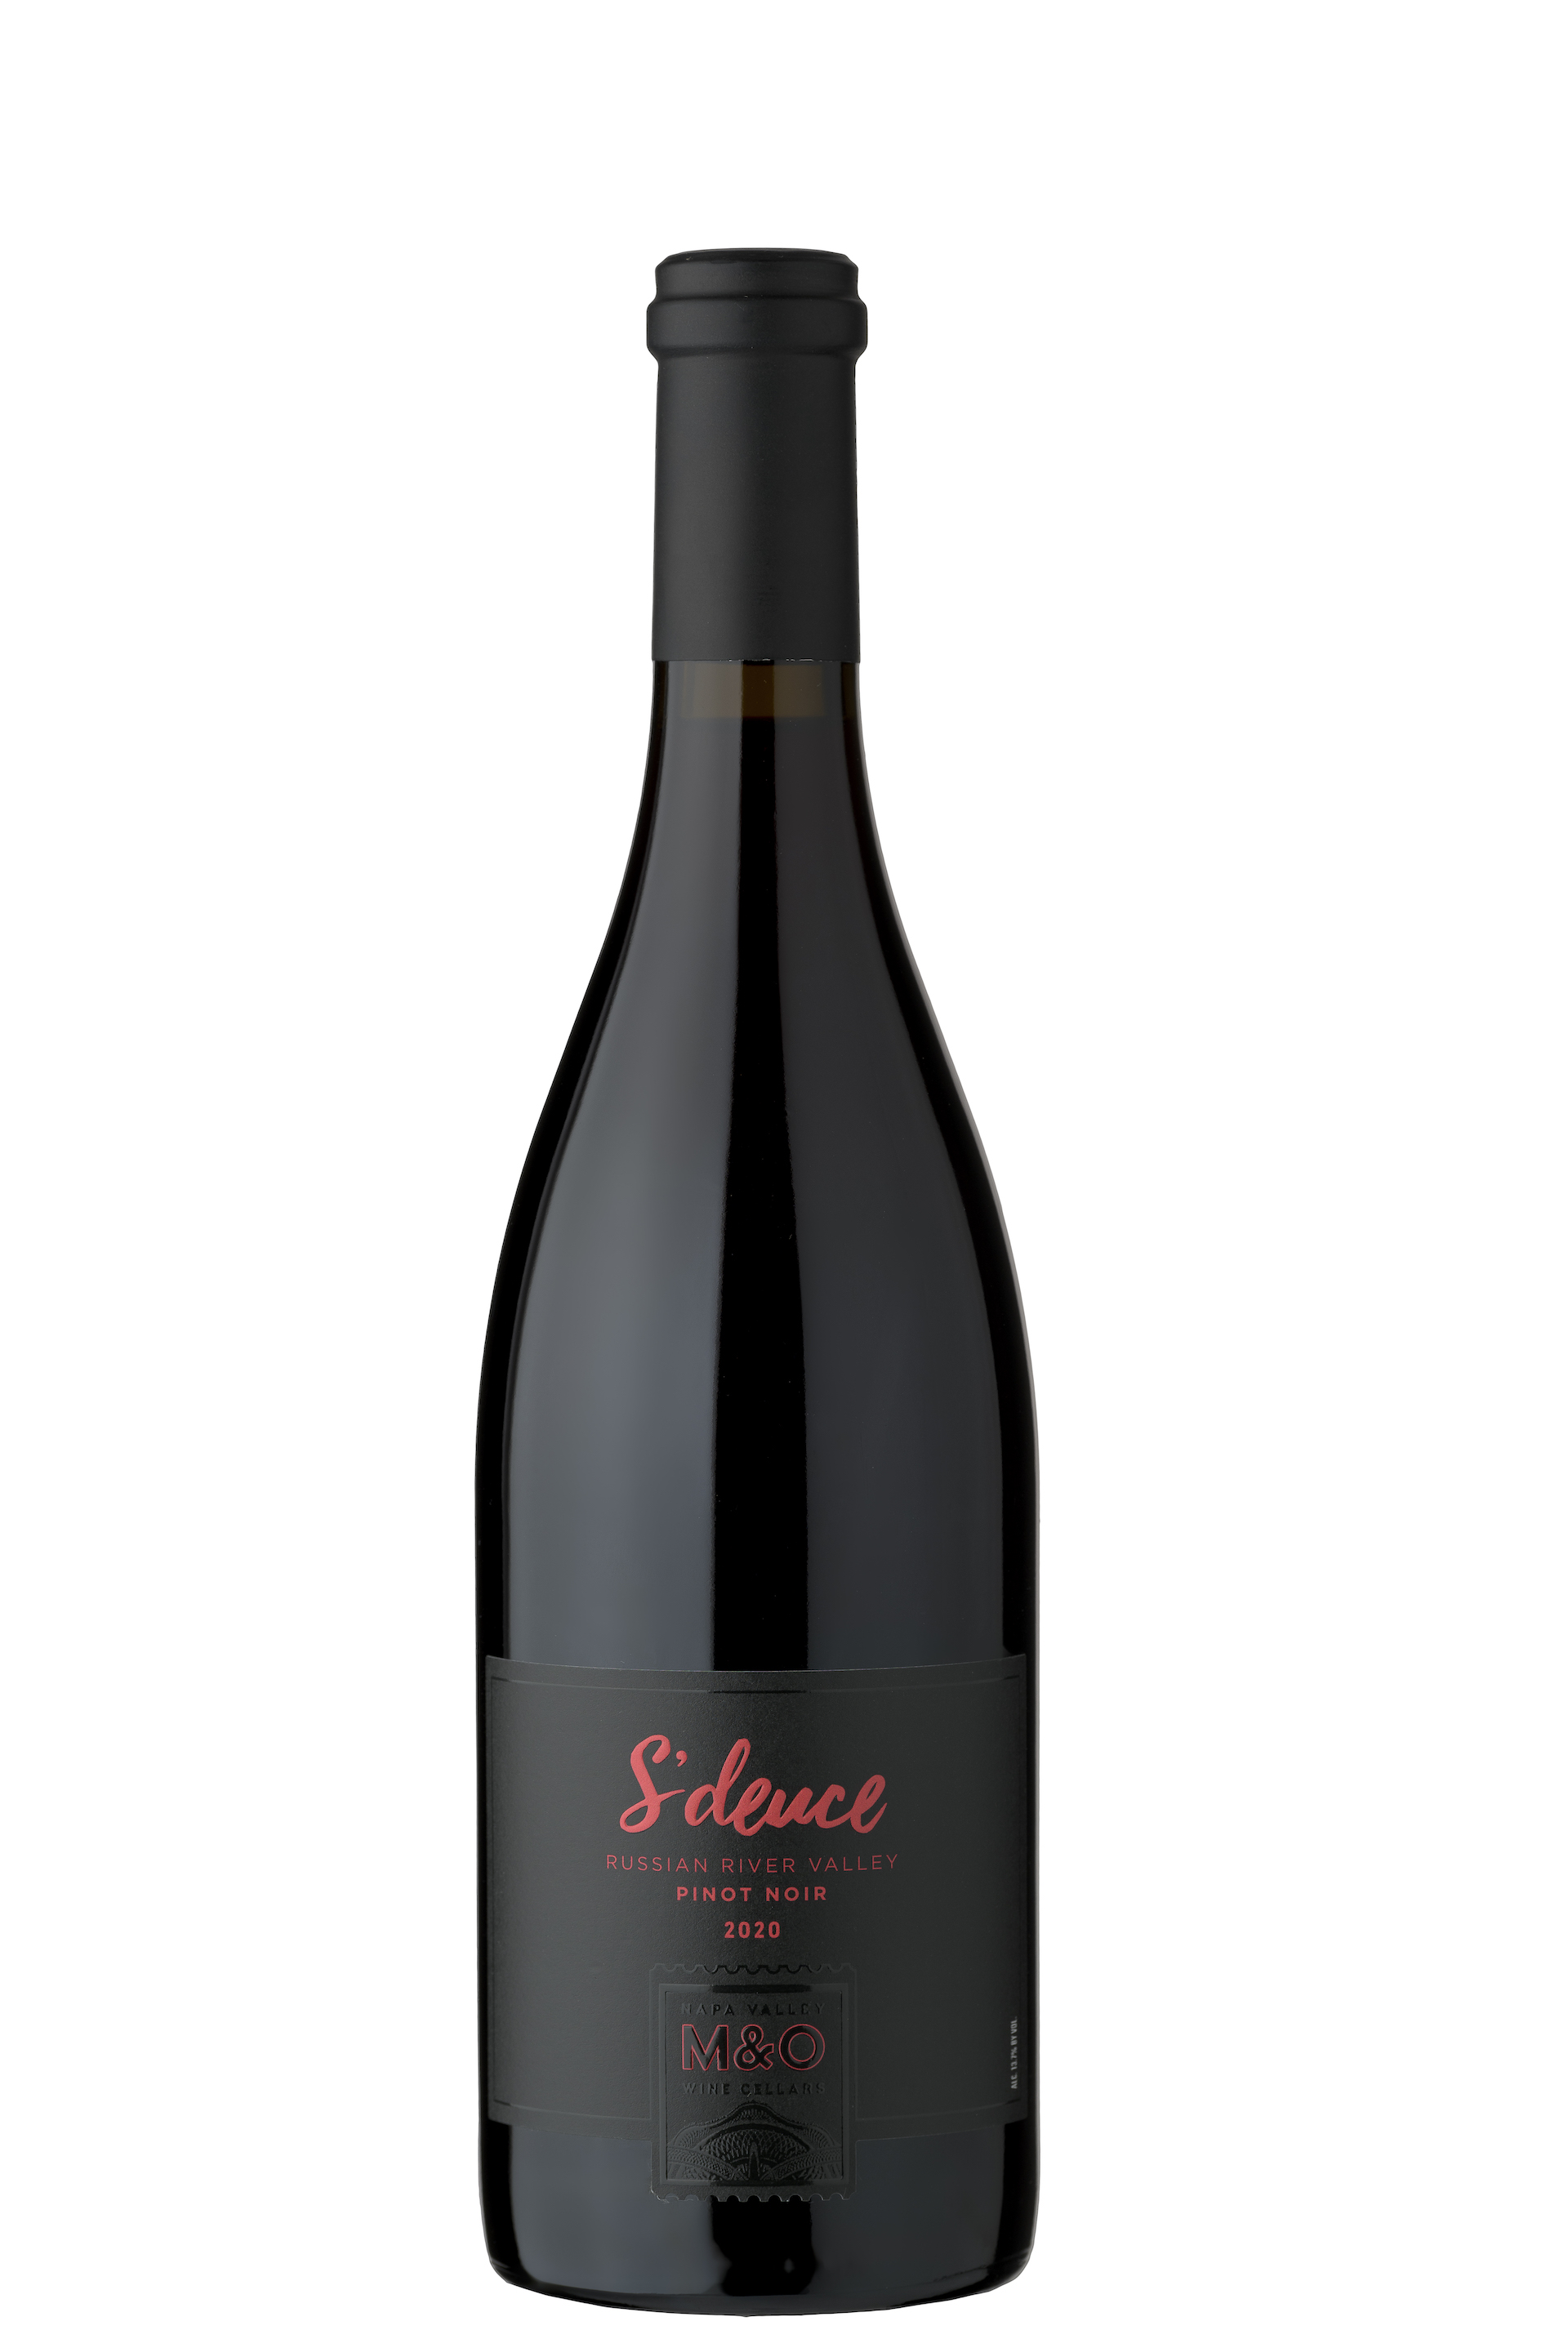 Product Image for 2018 S'deuce Russian River Valley Pinot Noir